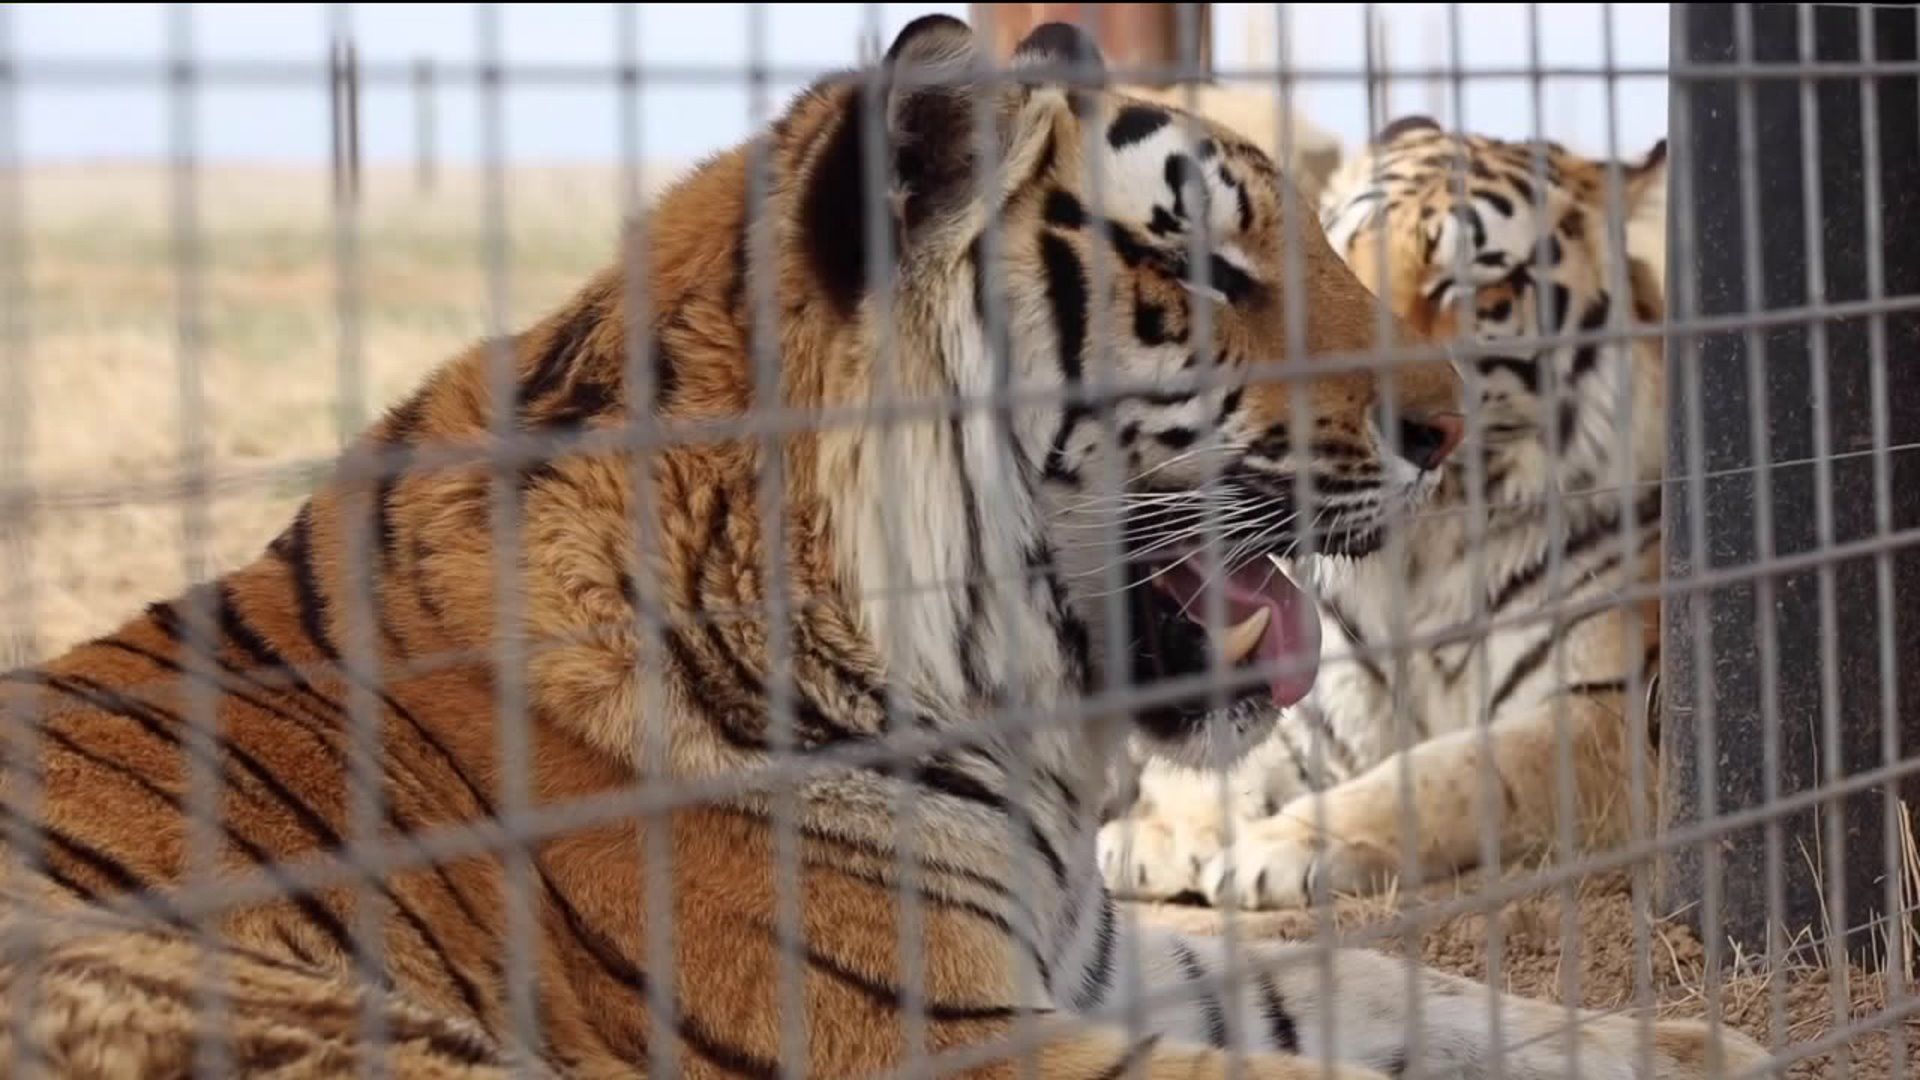 animals rescued from 'Tiger King' zoo in Oklahoma now at